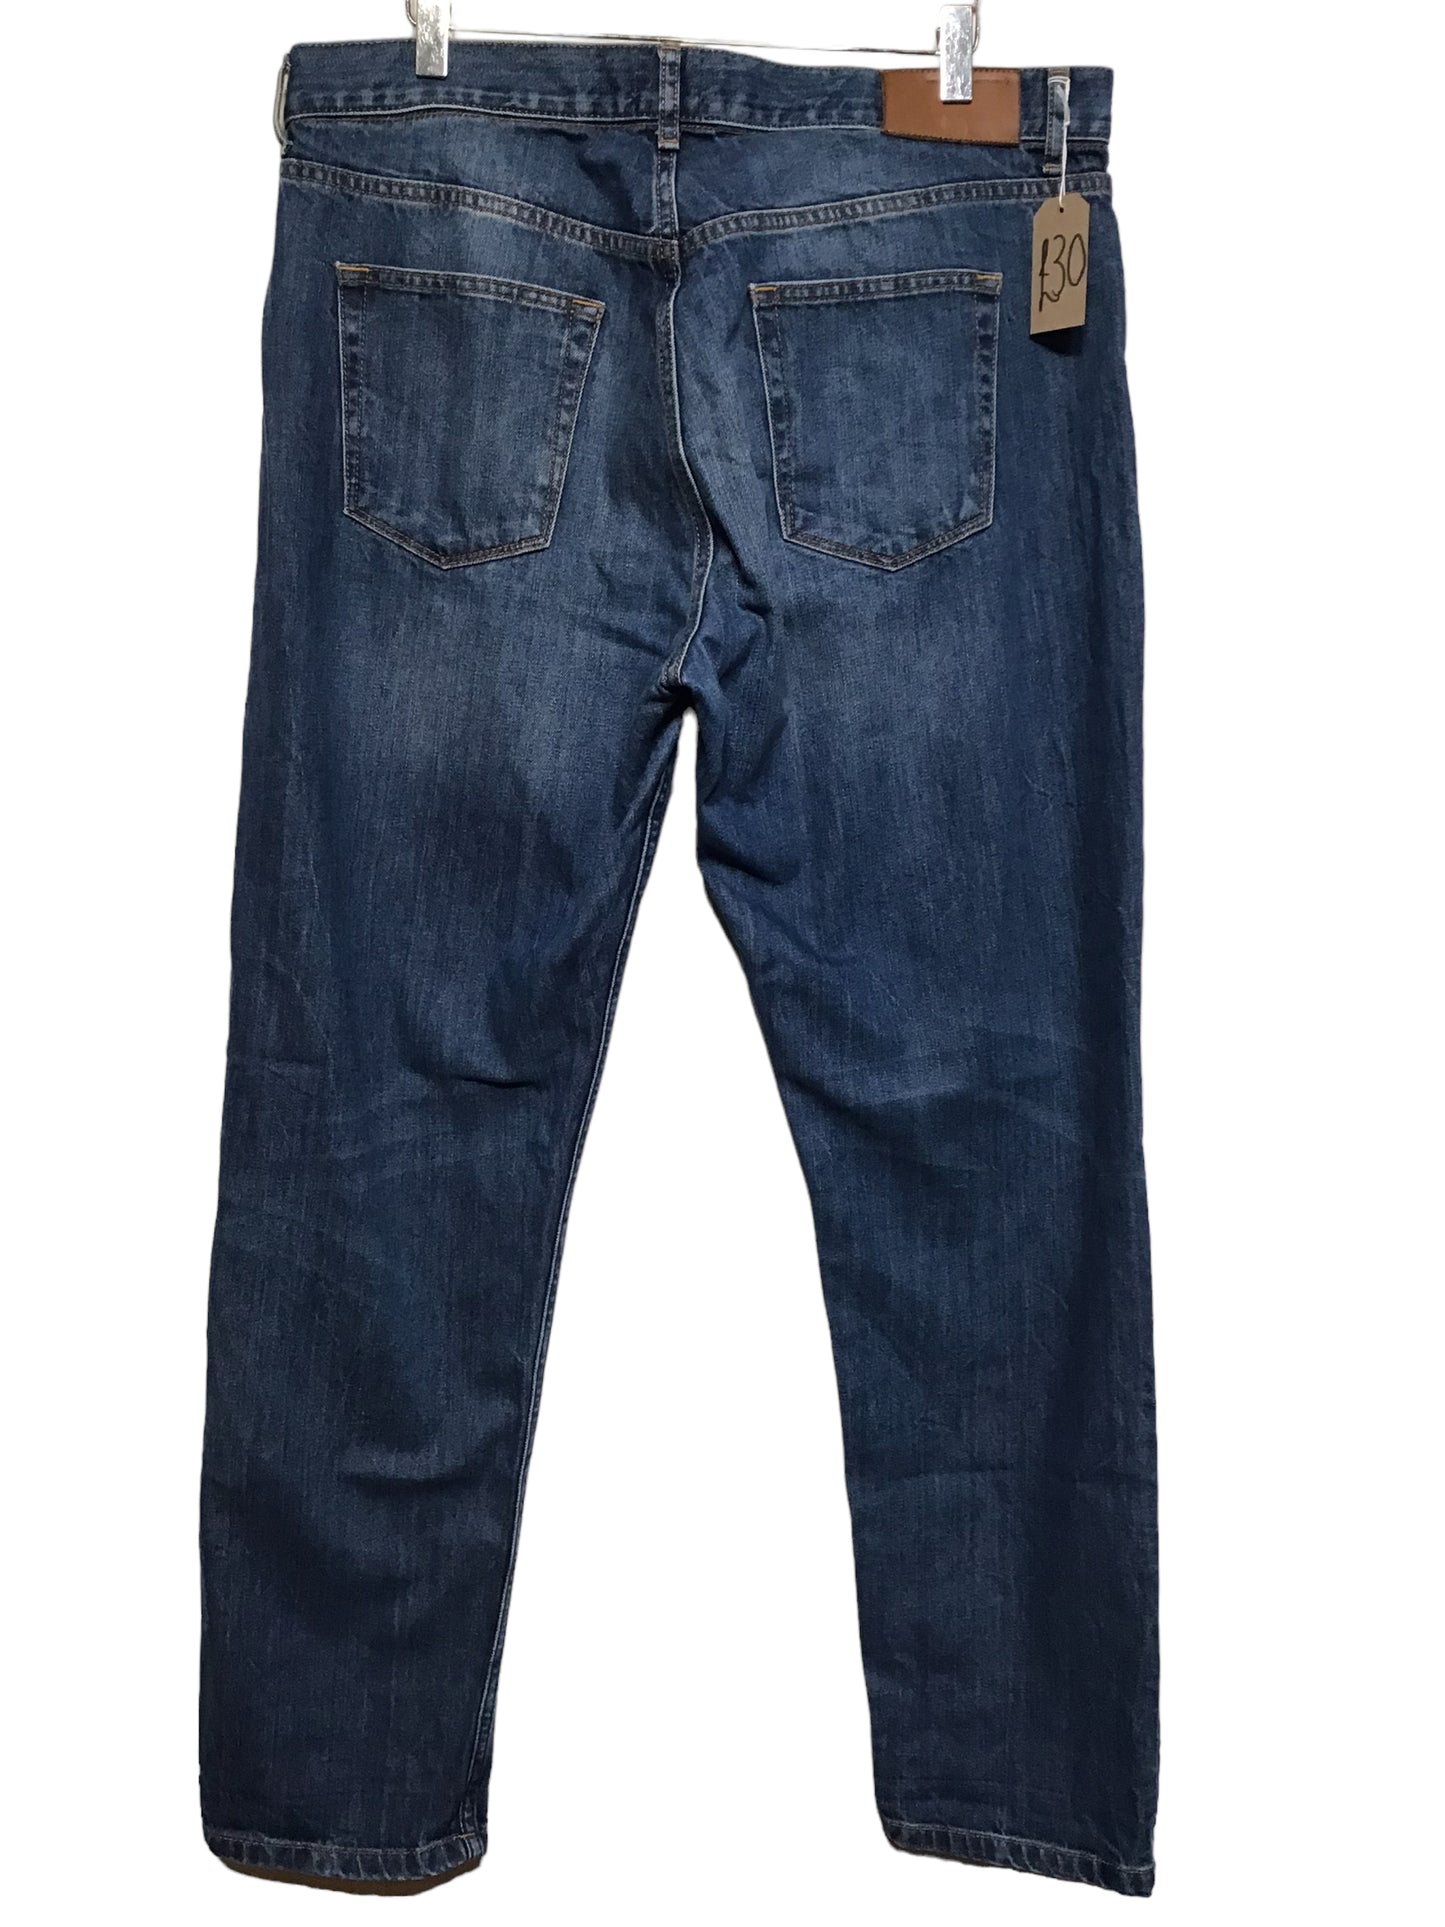 French Collection Jeans (37x30)